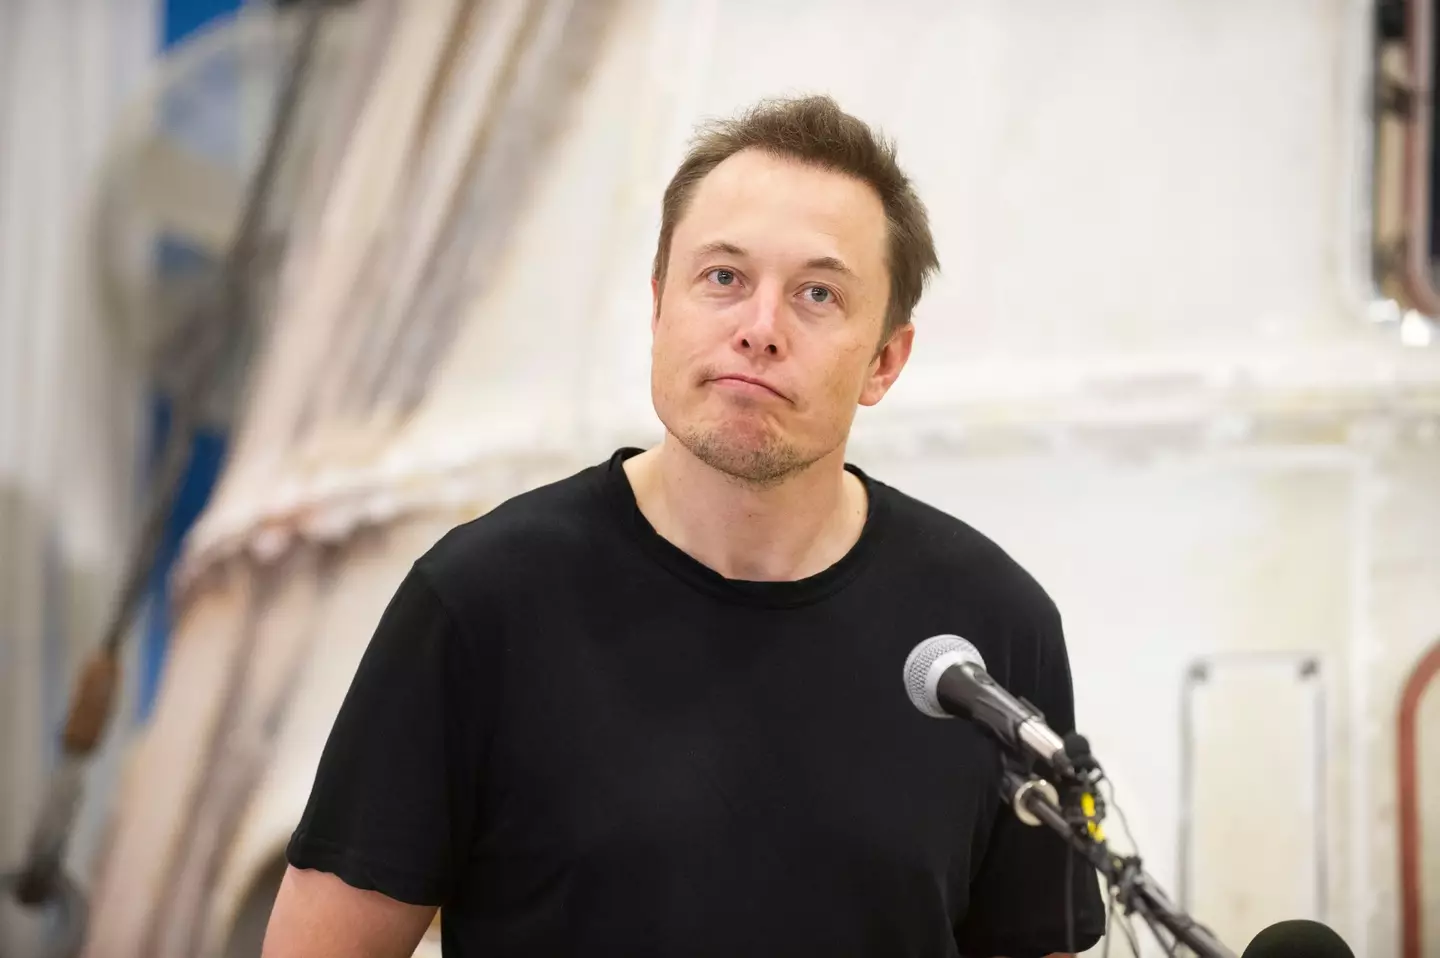 Elon Musk has responded after a bizarre AI image of himself went viral.